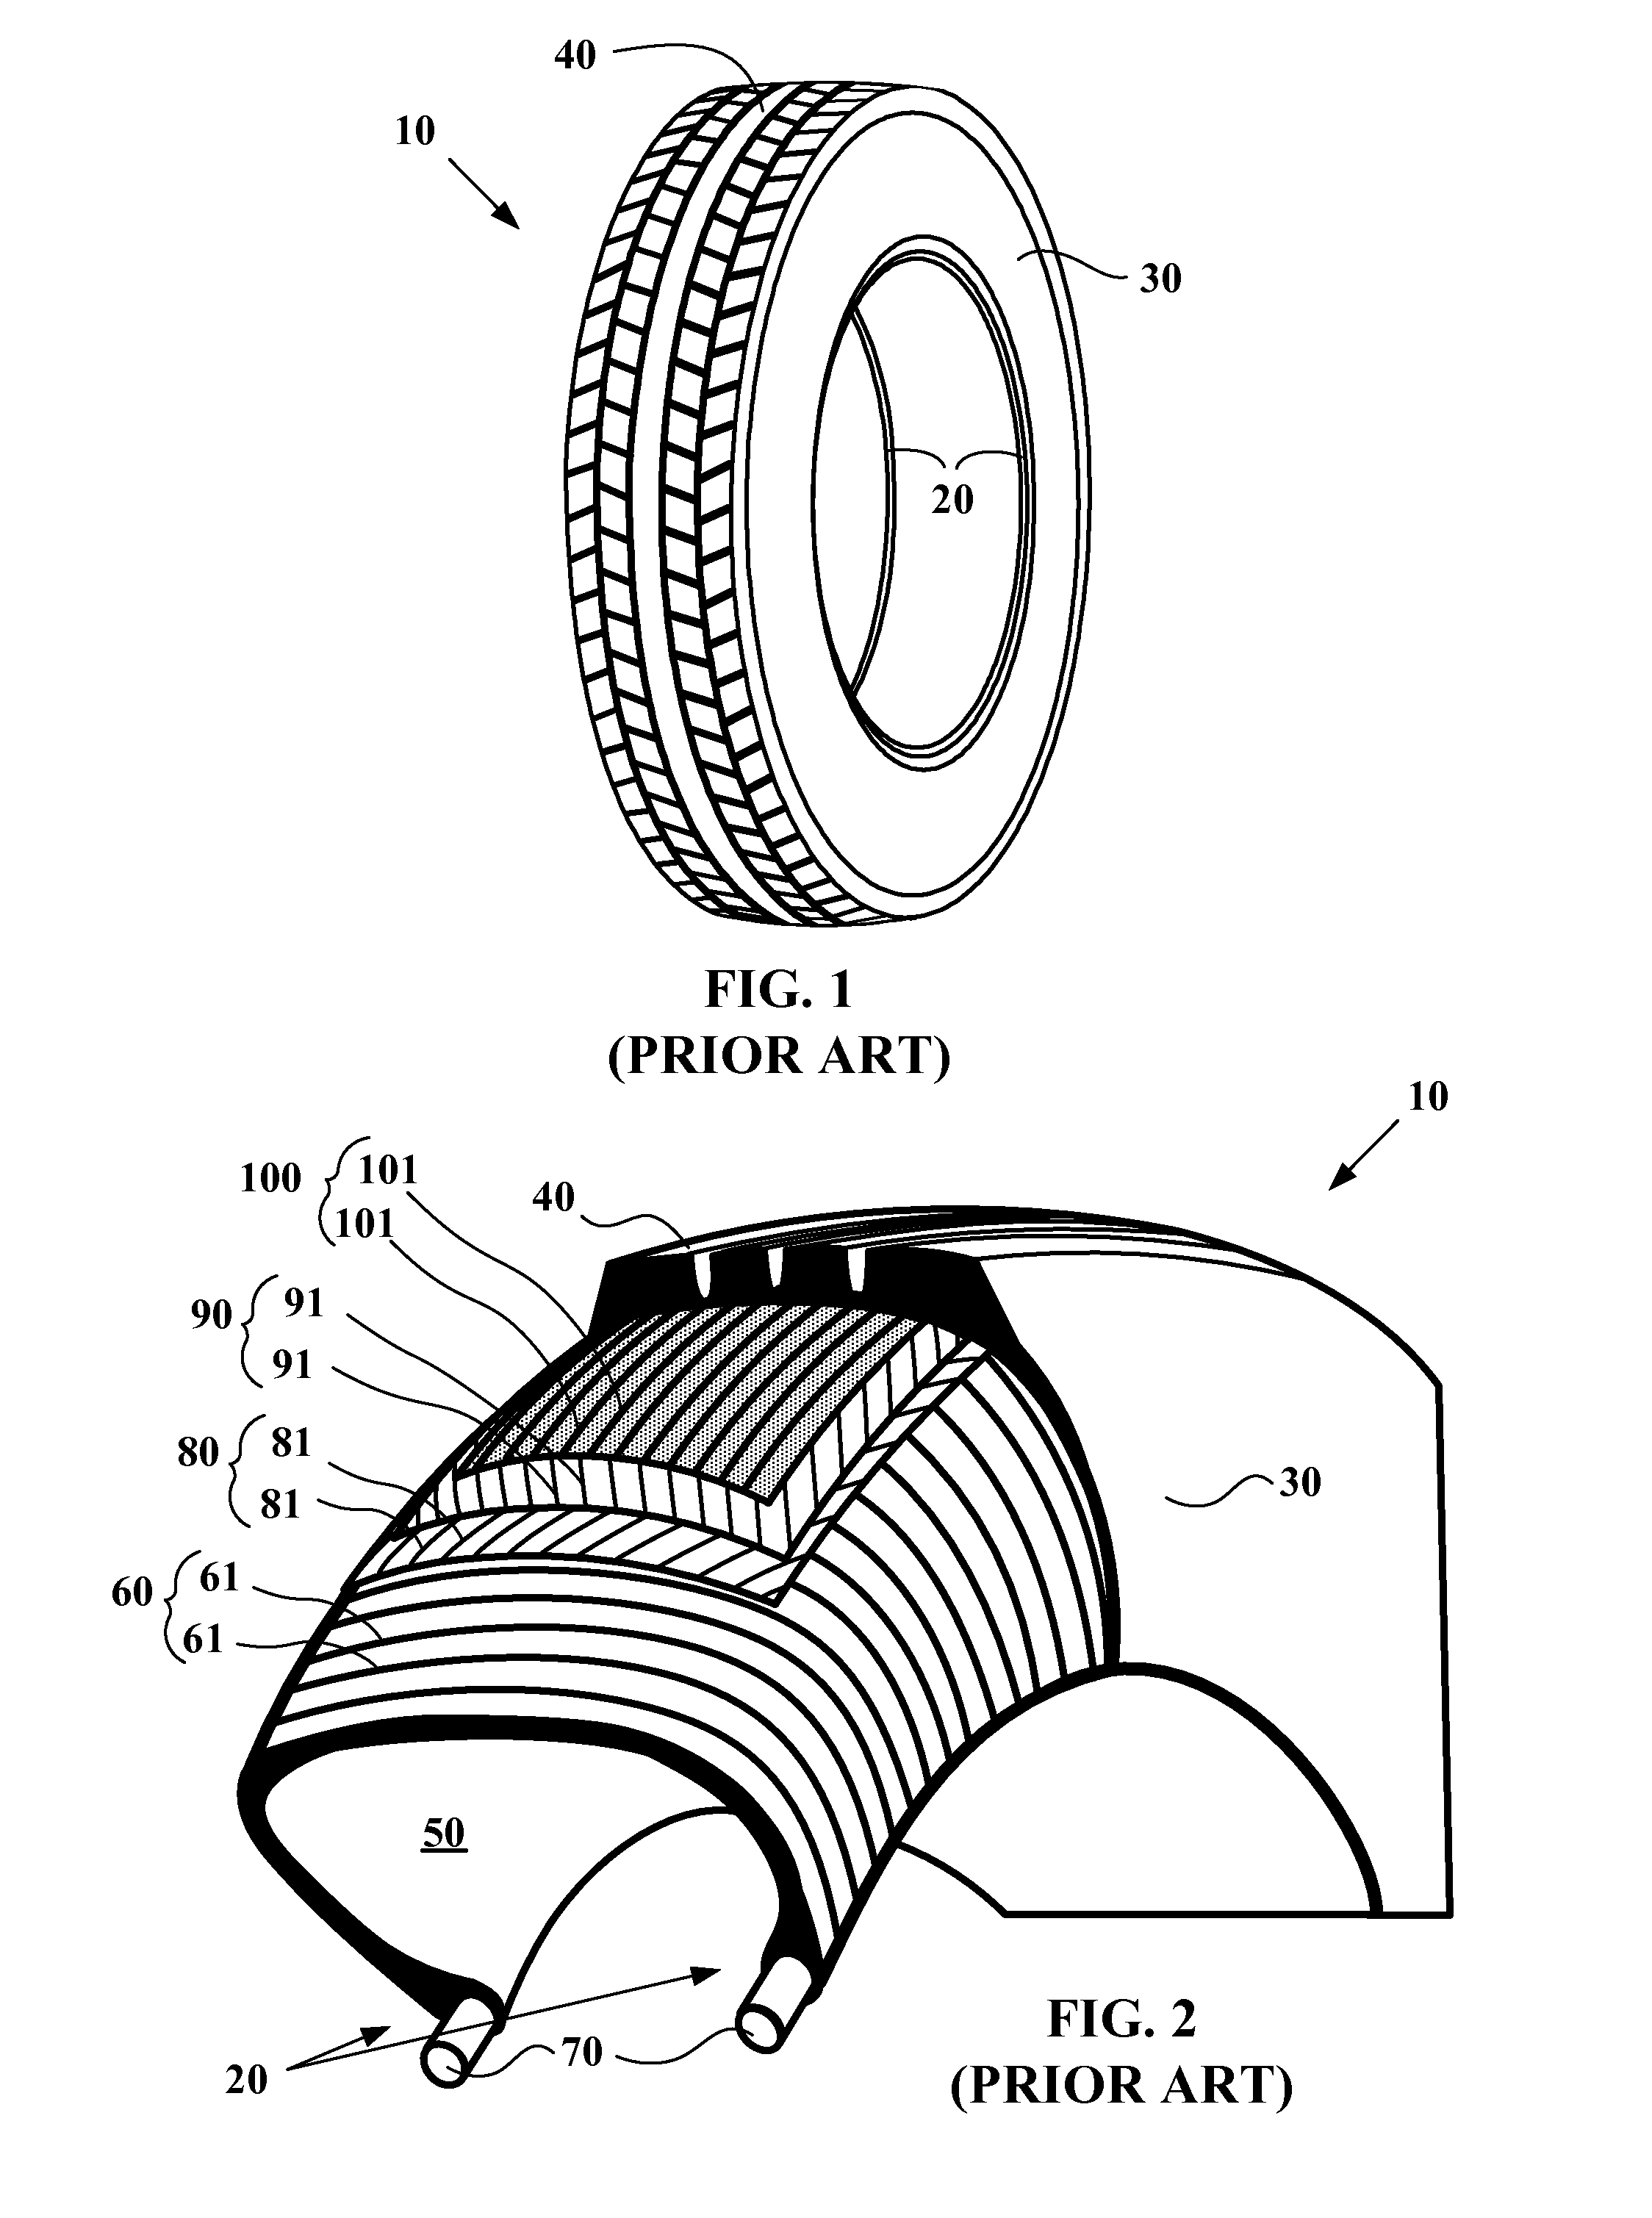 Tire with improved beads